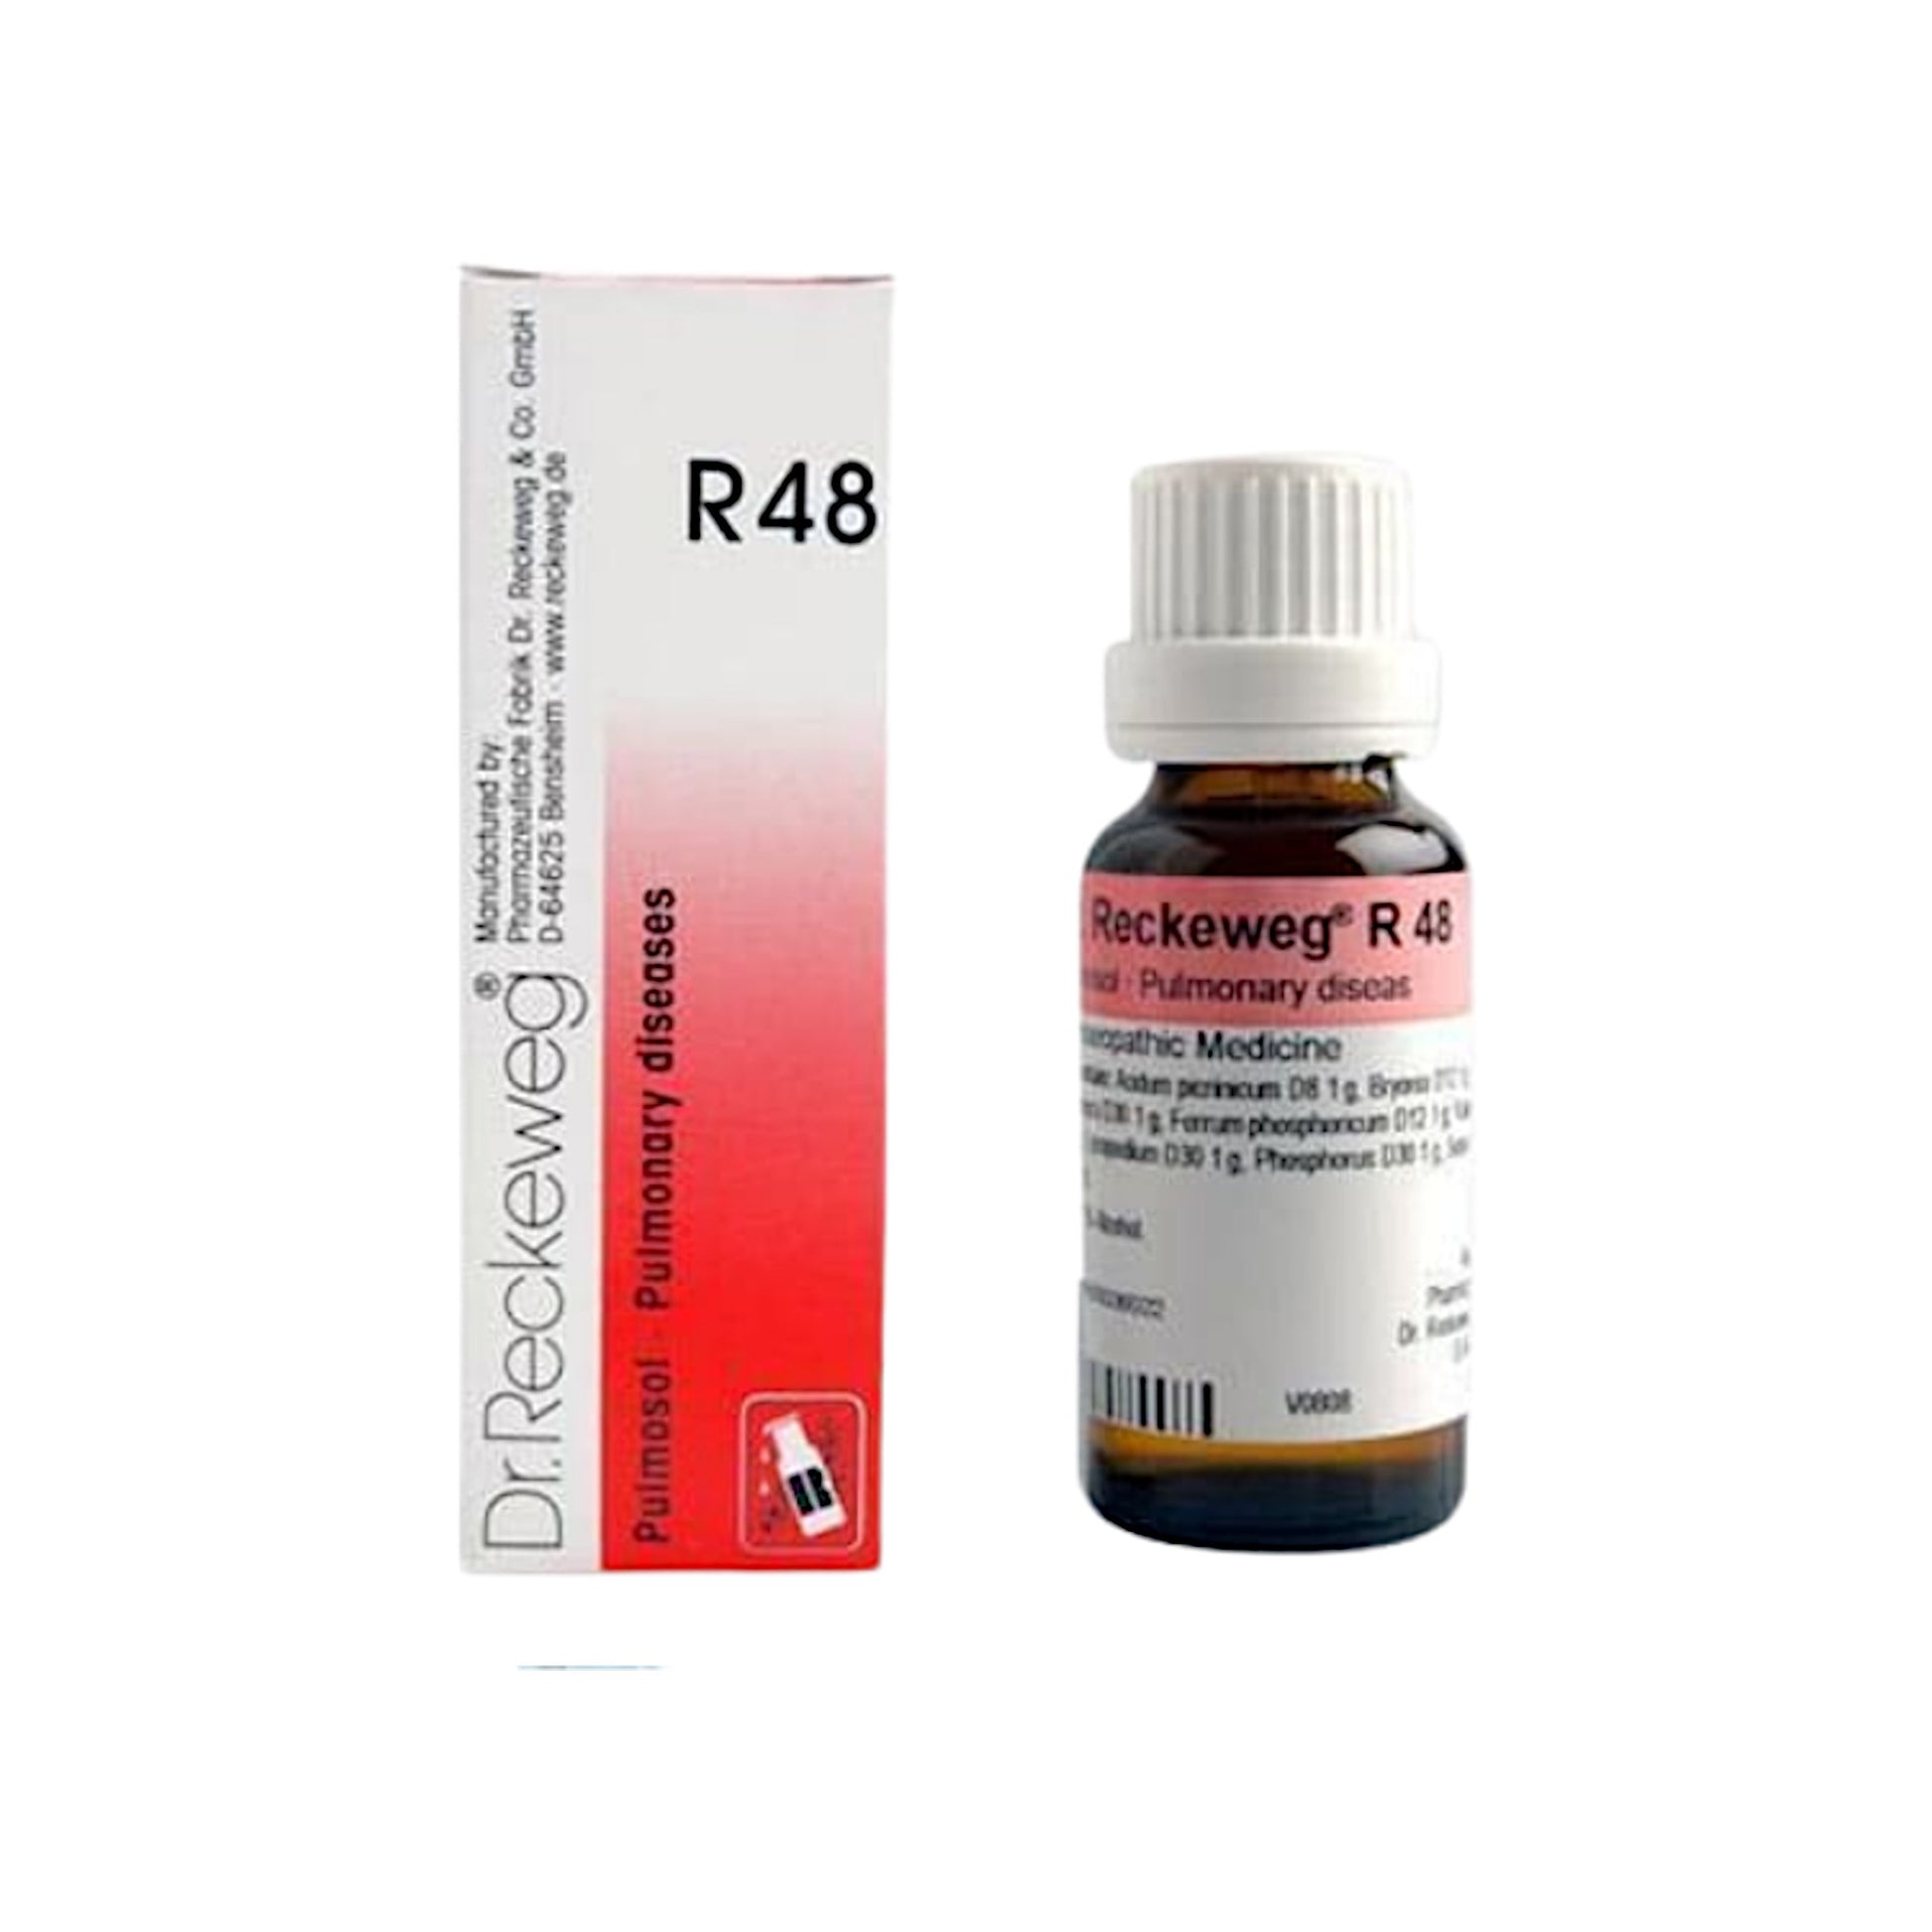 Image for DR. RECKEWEG R48 Pulmosol Pulmonary Drops 22 ml: For early-stage tuberculosis, asthma, and bronchial conditions.